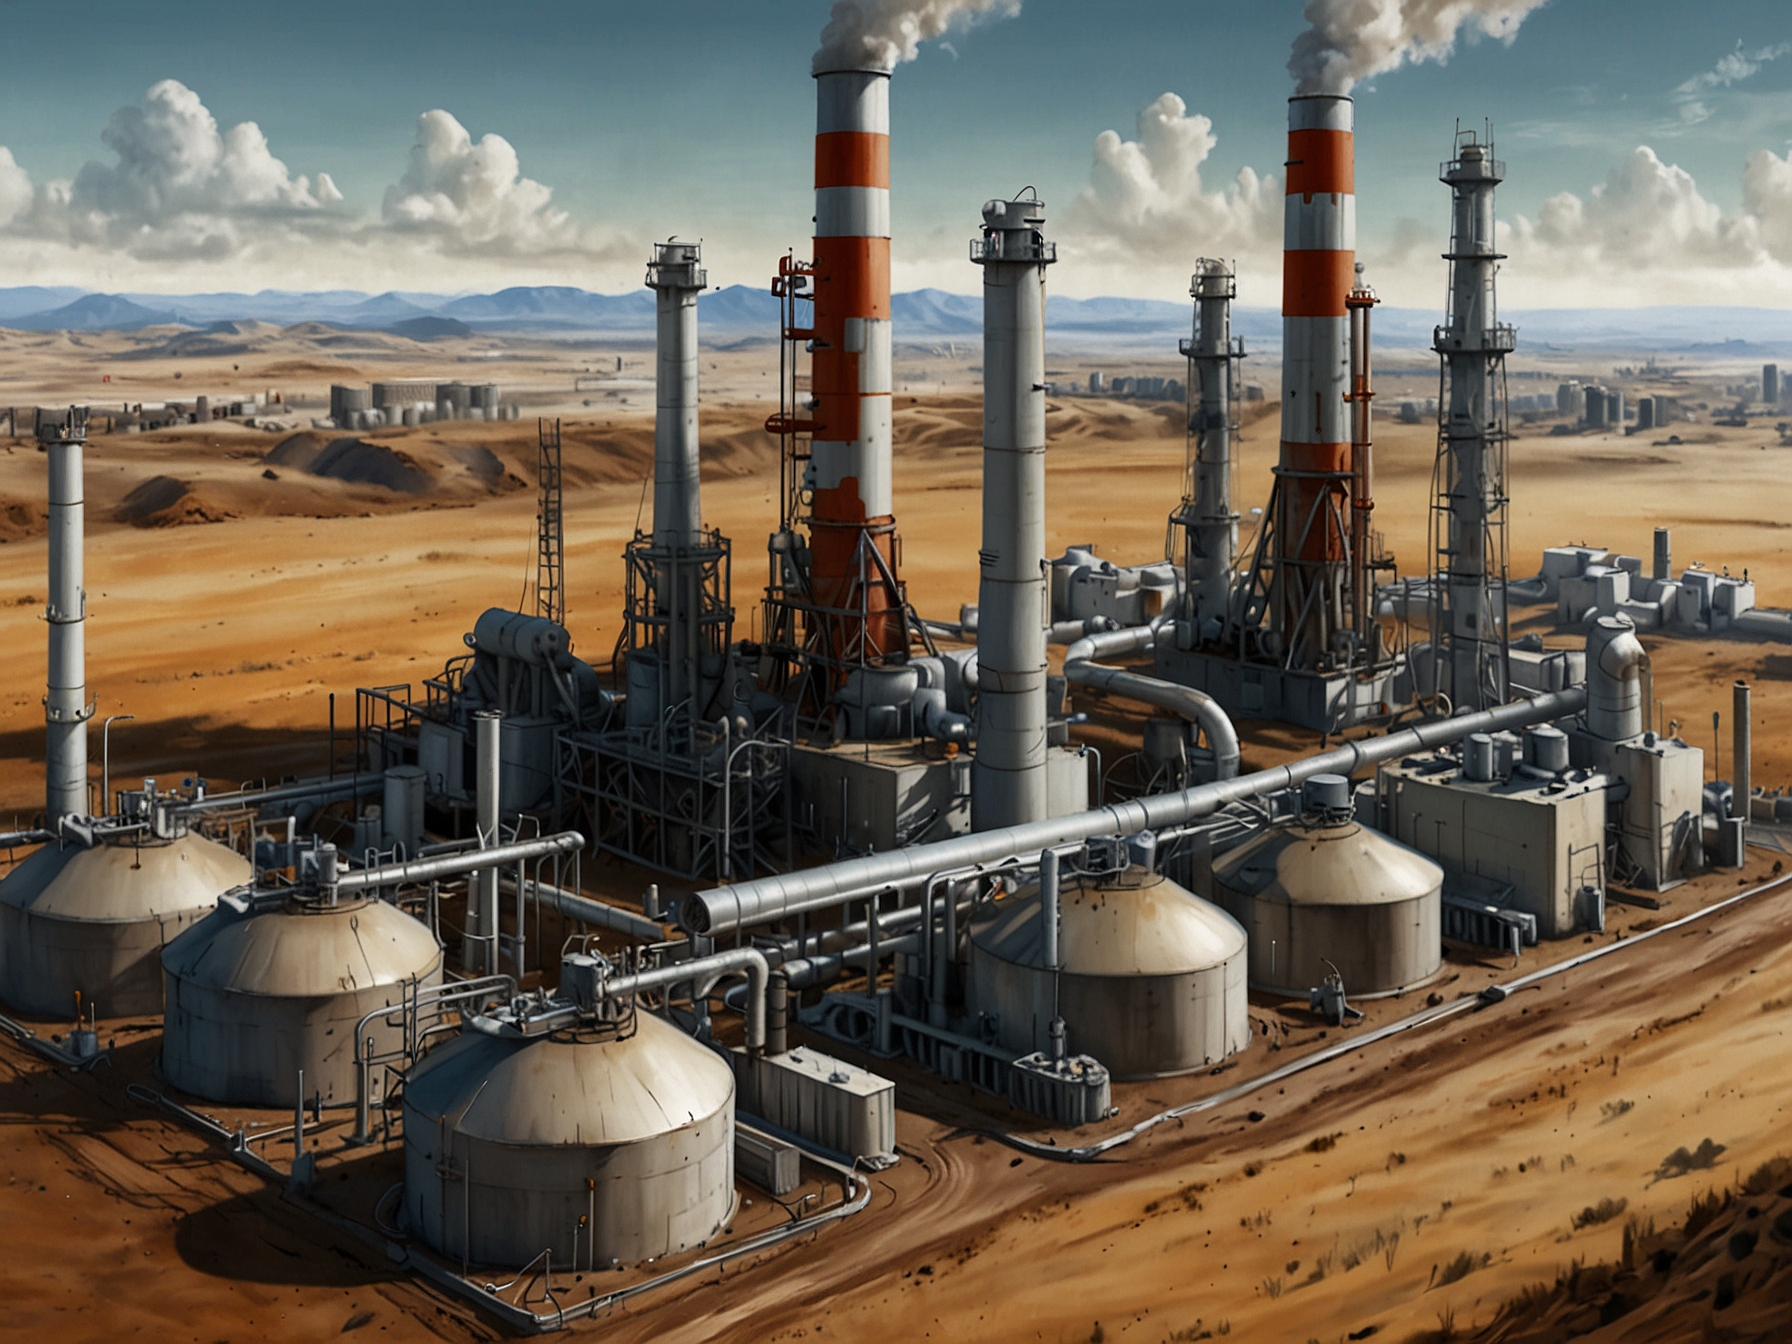 An illustration showing a carbon capture and storage (CCS) facility next to an oilfield, highlighting the process of capturing CO2 emissions and injecting them underground to rejuvenate depleted oil reservoirs.